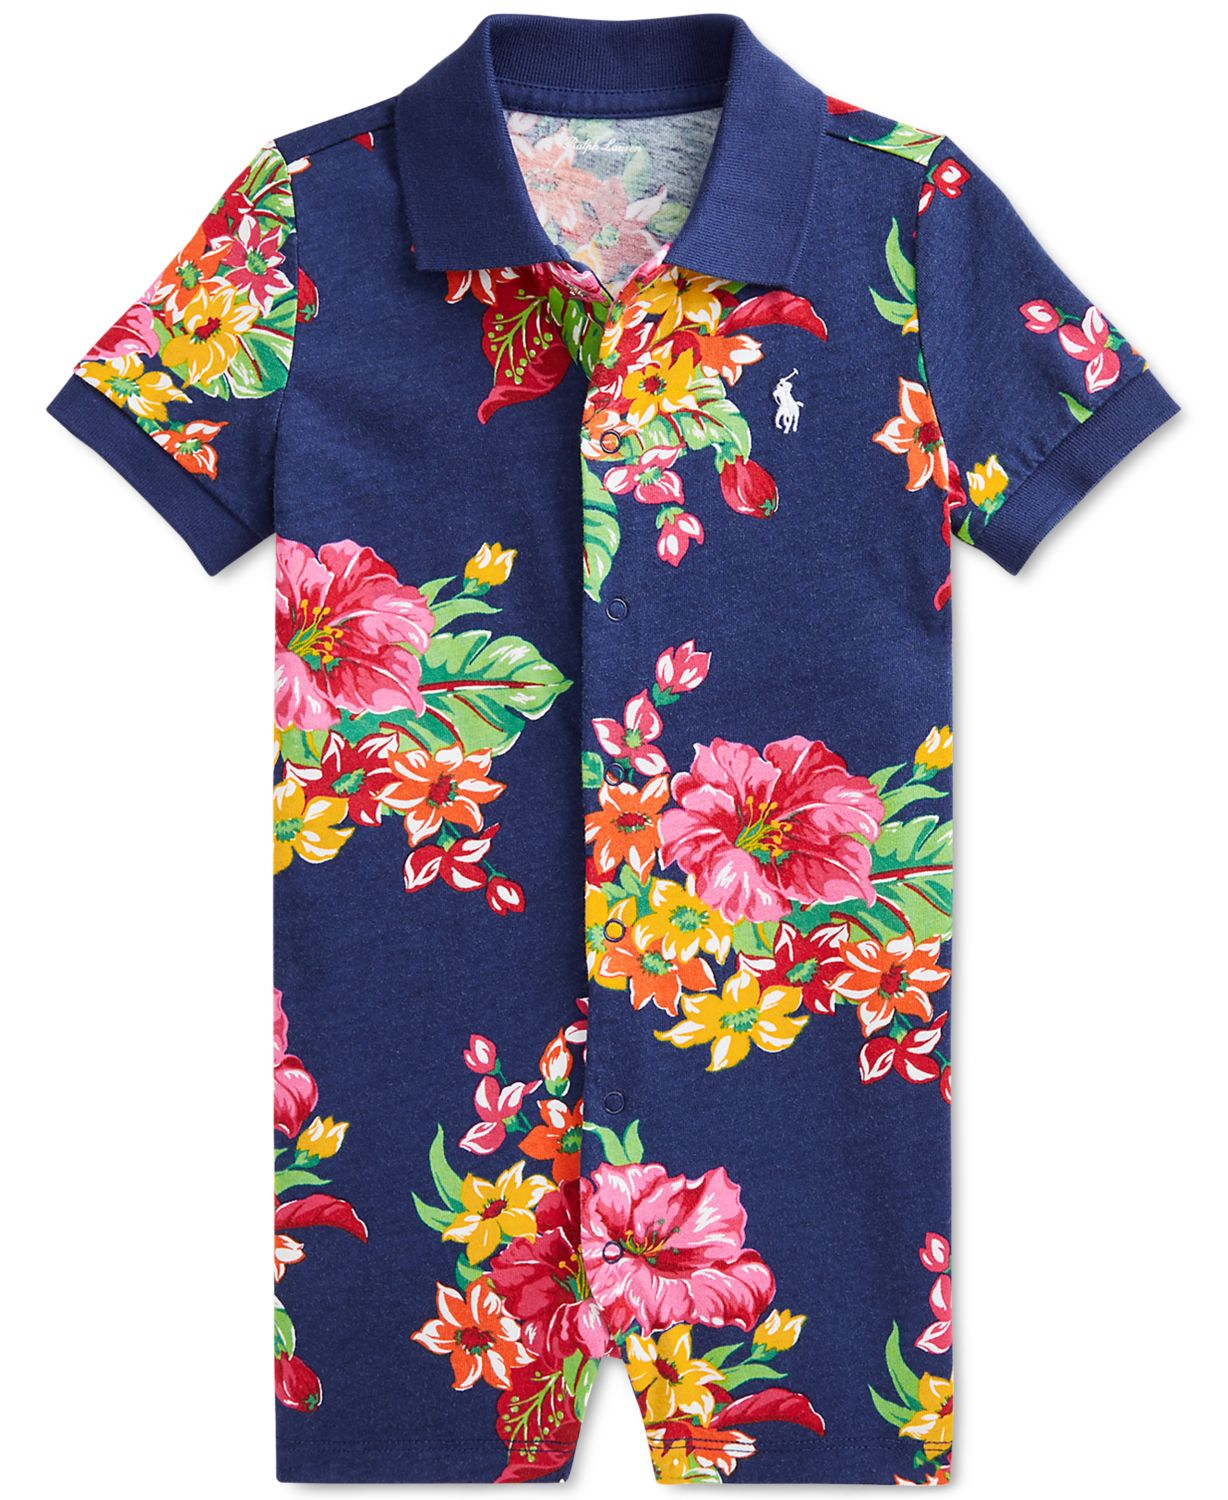 Polo Ralph Lauren Baby Boys Floral-Print Cotton Romper & Reviews - All Baby - Kids - Macy's